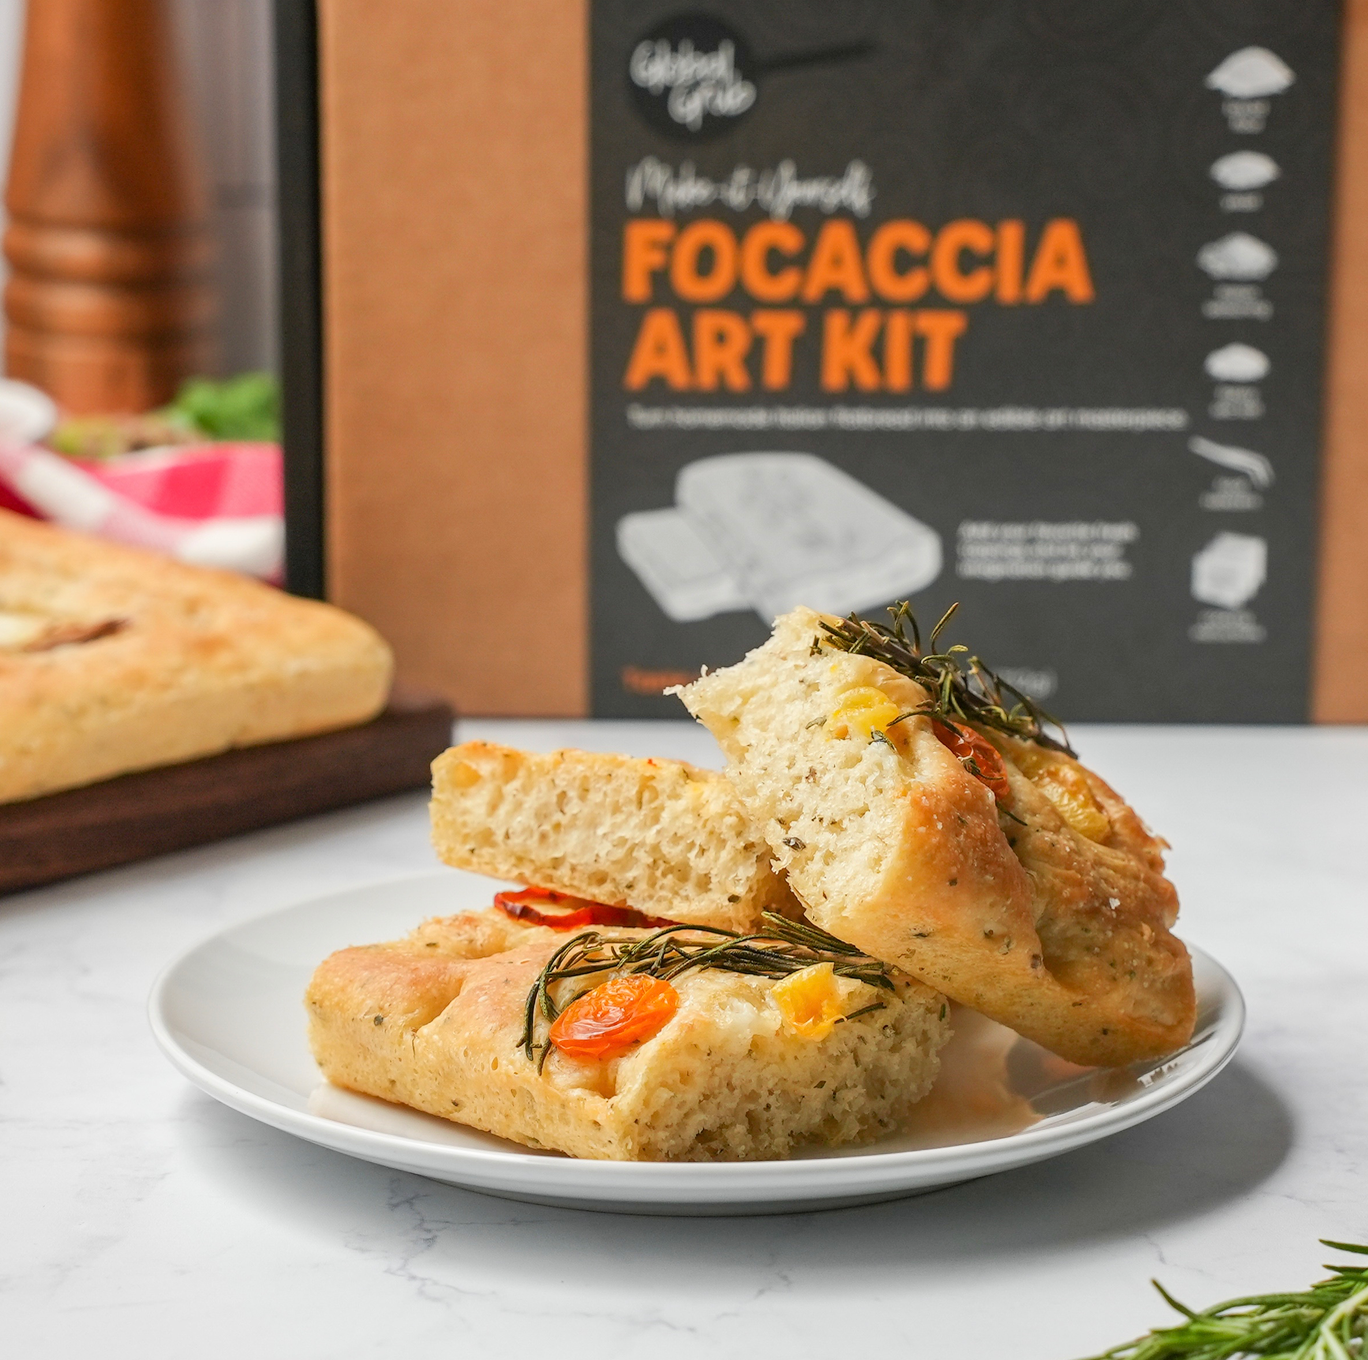 Focaccia bread, crispy on the outside and light and fluffy on the inside